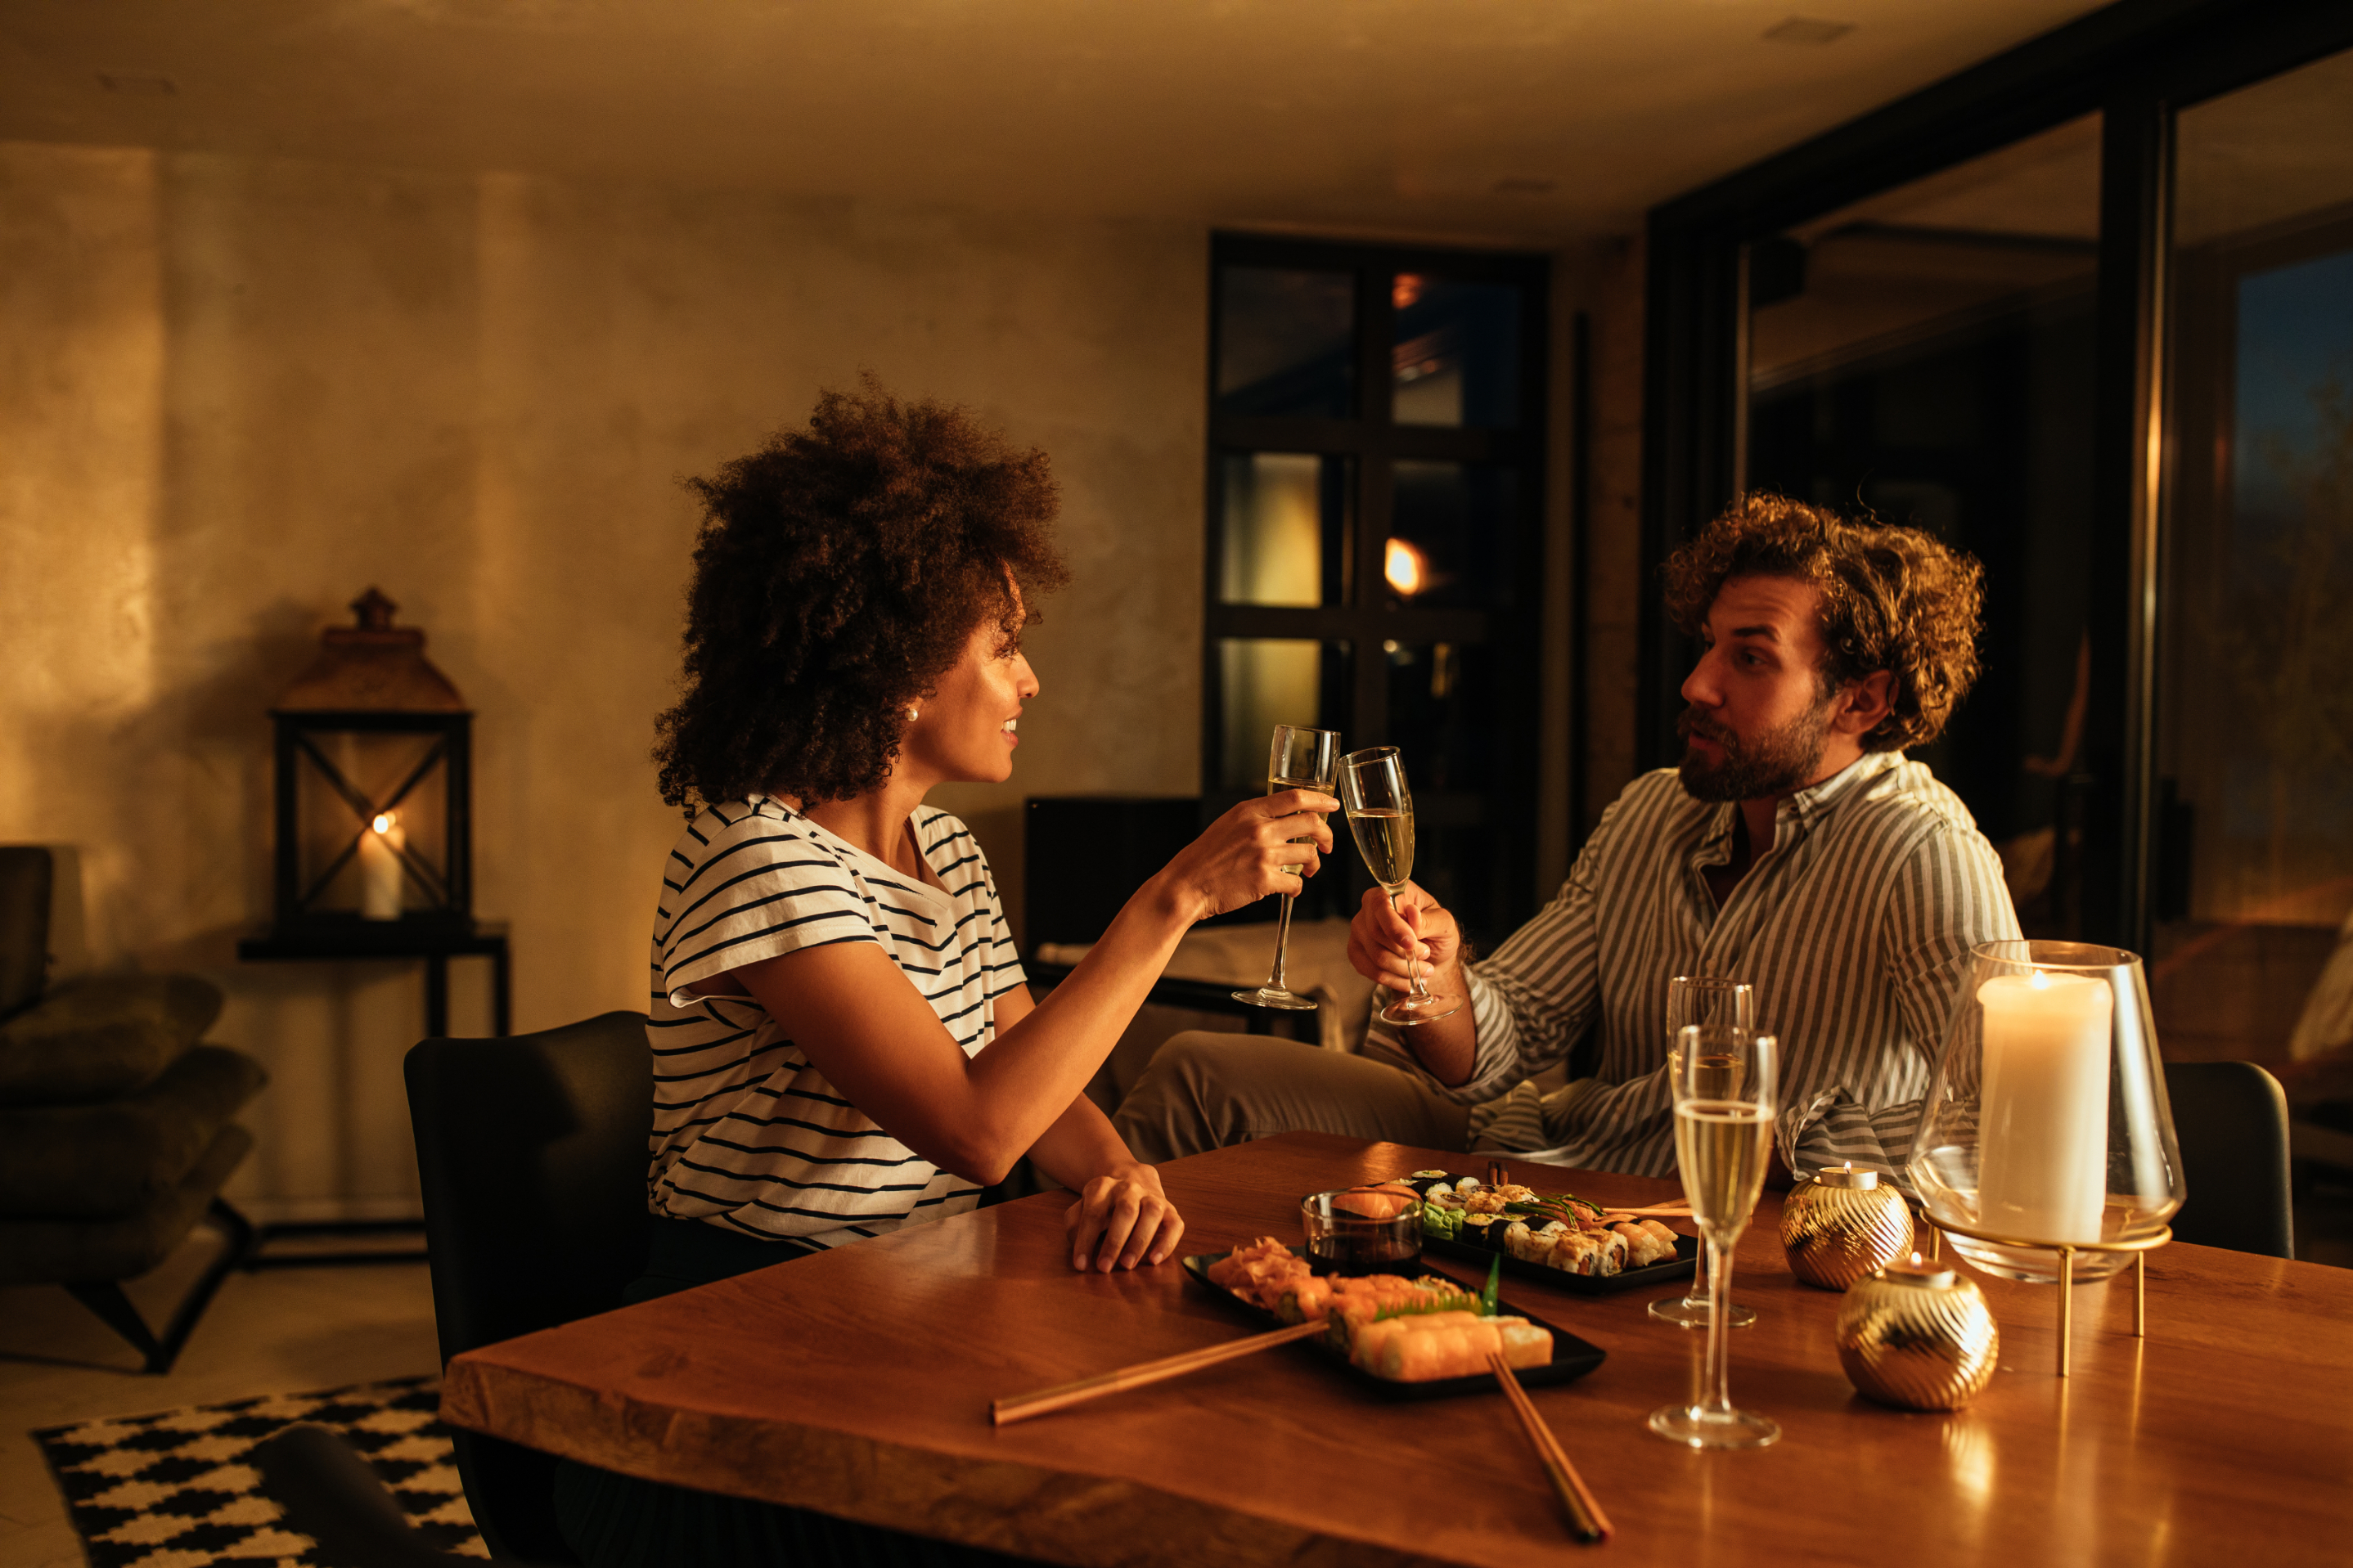 Two people having a candlelit dinner and toasting with wine glasses